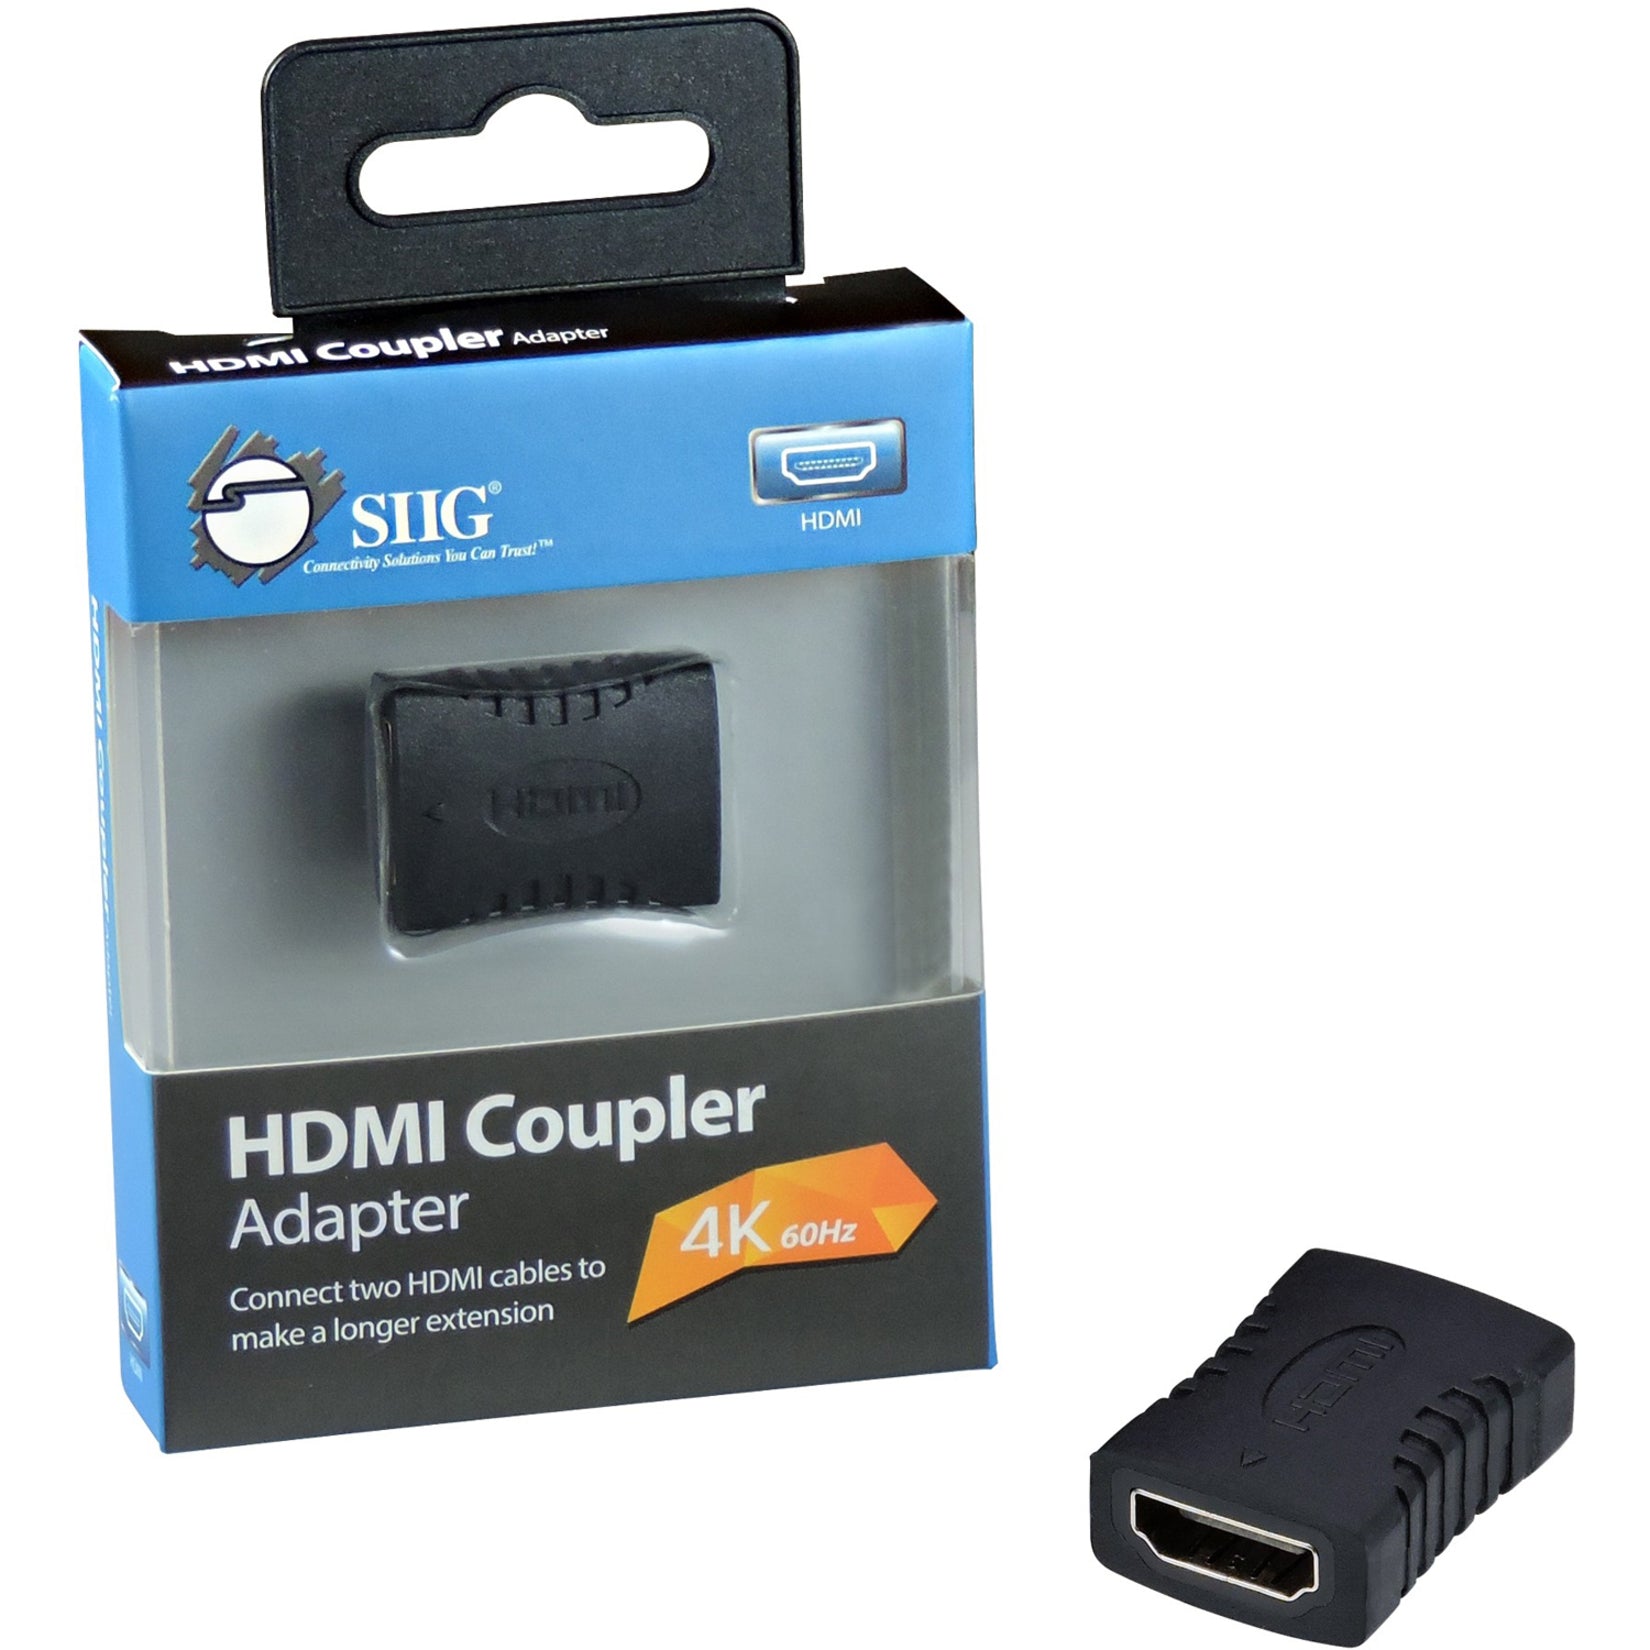 SIIG CE-H22H12-S1 HDMI Coupler Adapter, Corrosion Resistance, Gold-Plated Connectors